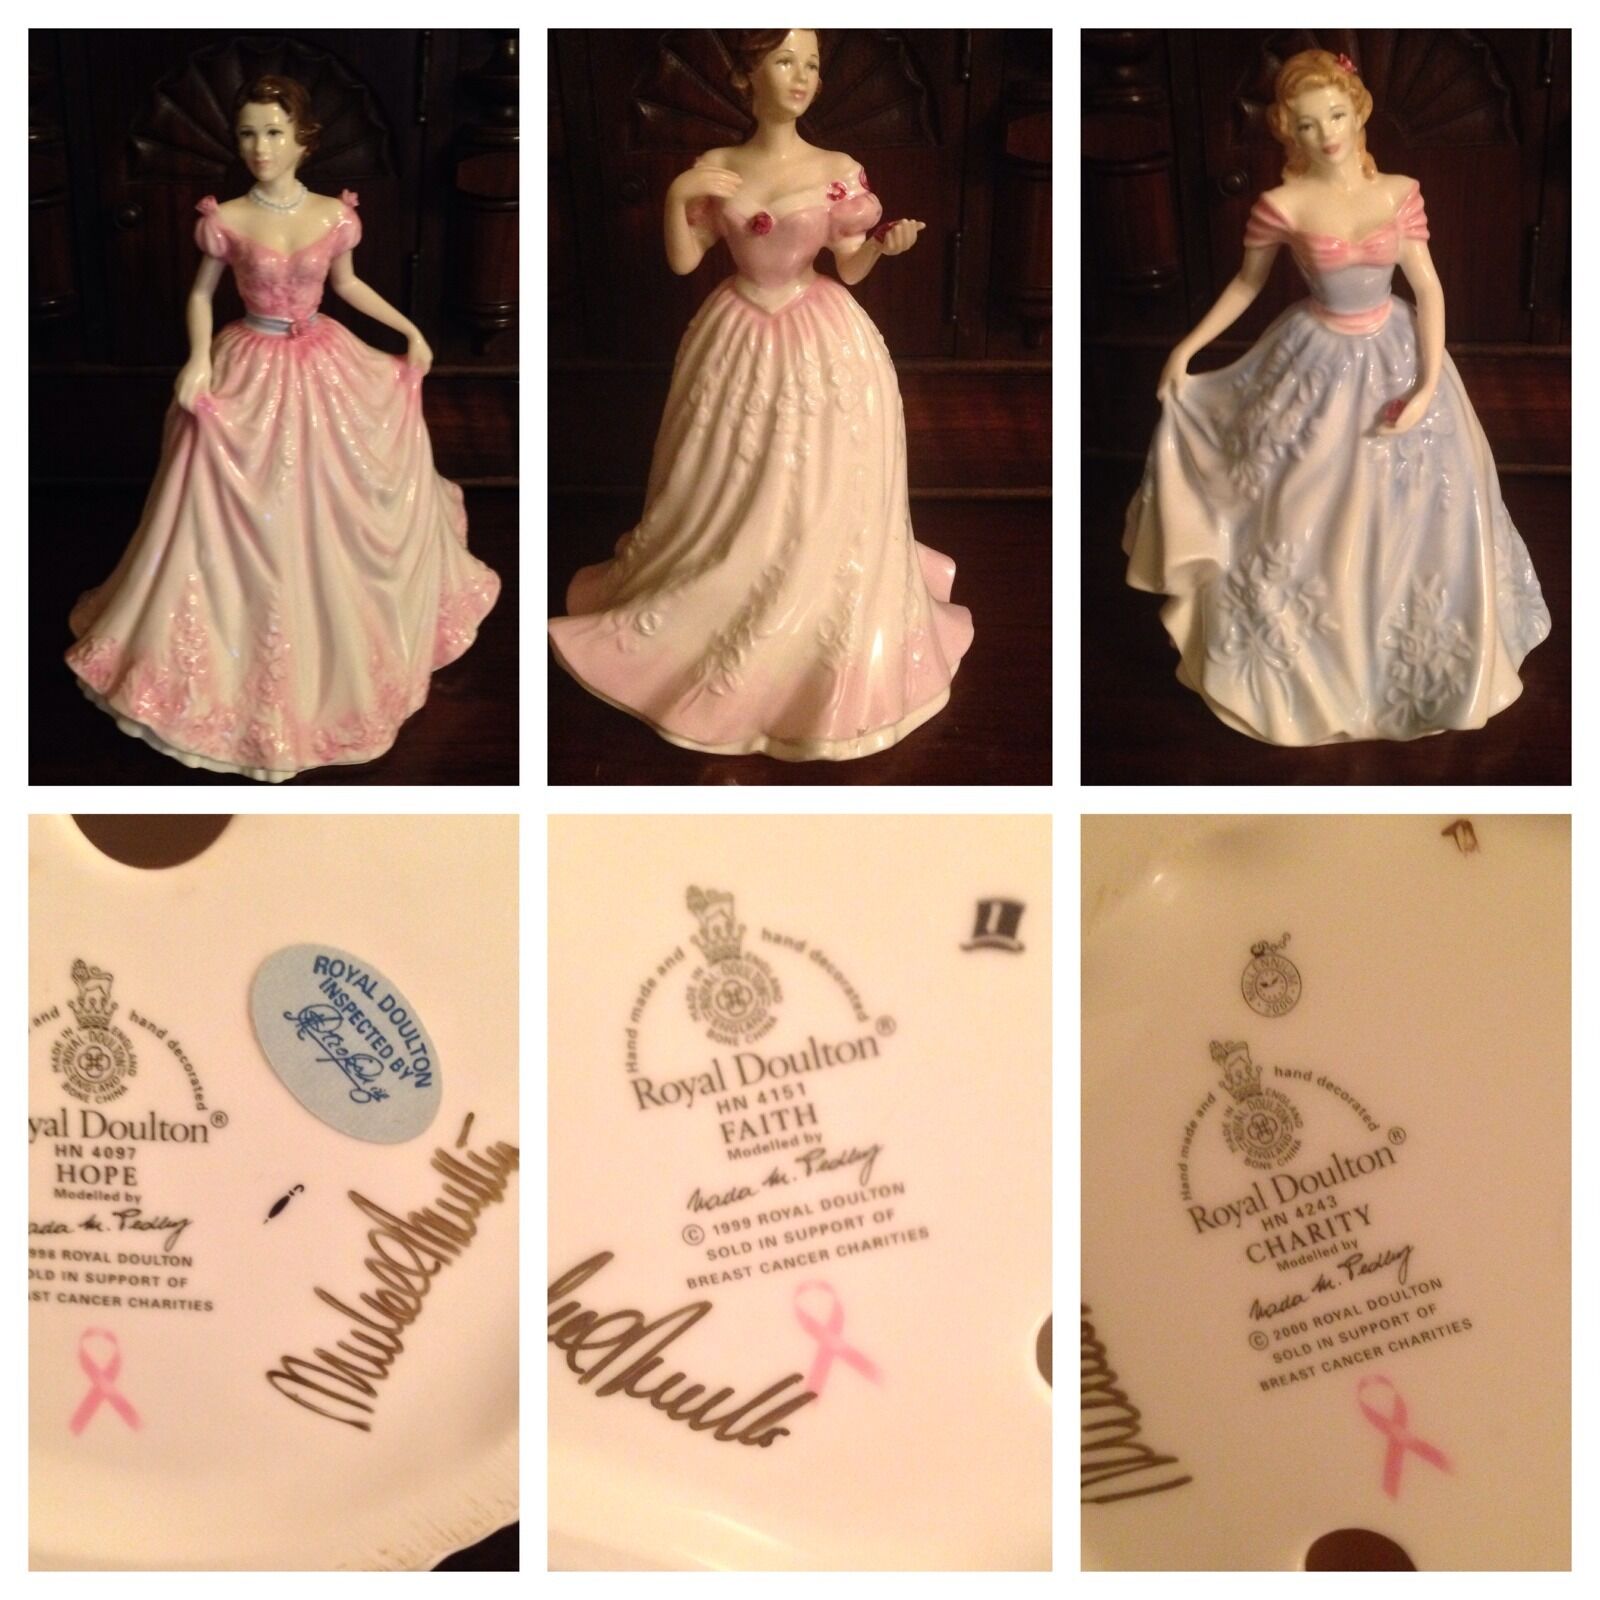 Royal Doulton Breast Cancer Porcelain Charity Collection signed by W. Dalton